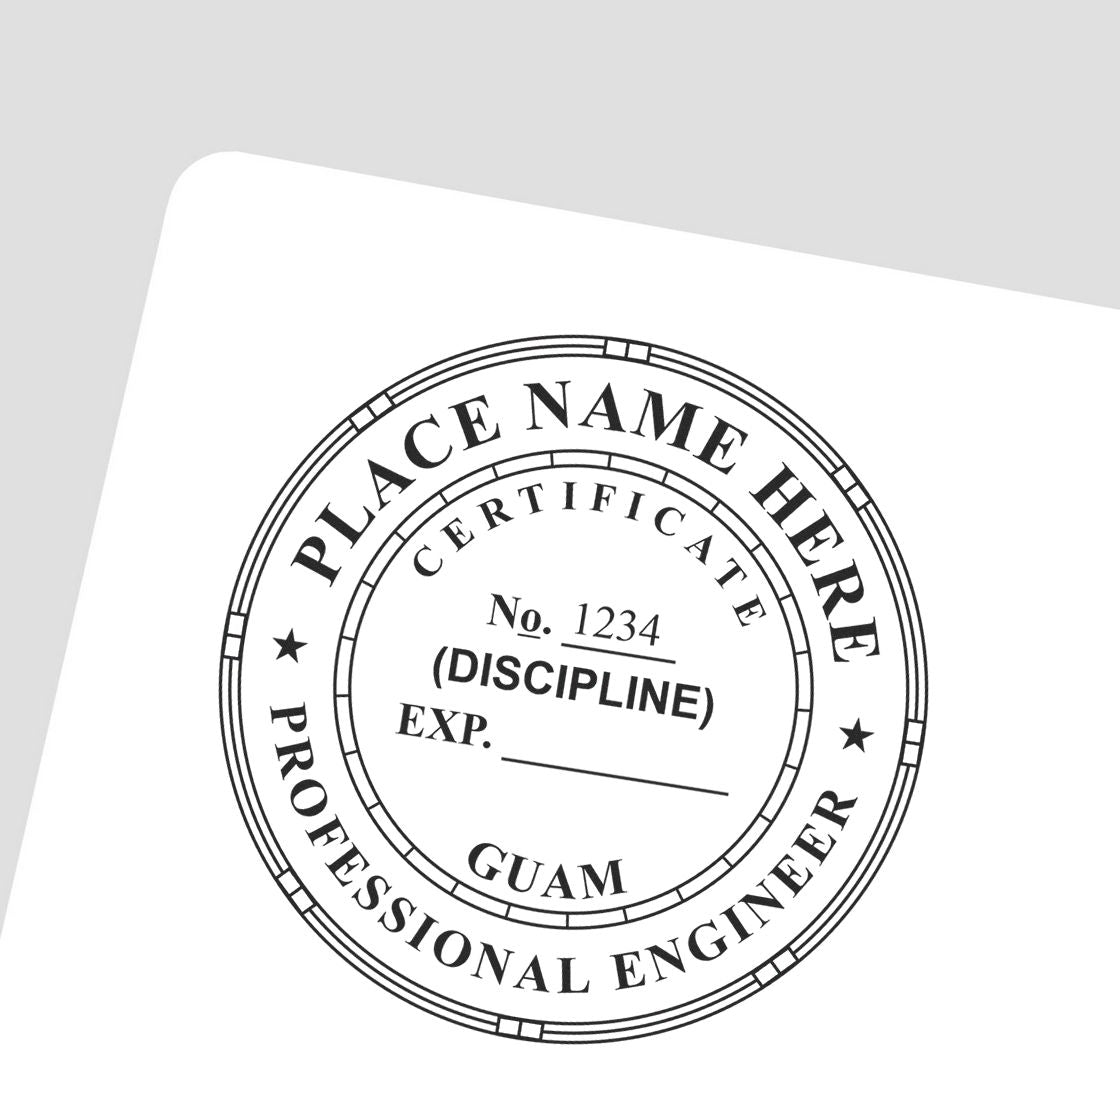 Another Example of a stamped impression of the Guam Professional Engineer Seal Stamp on a piece of office paper.